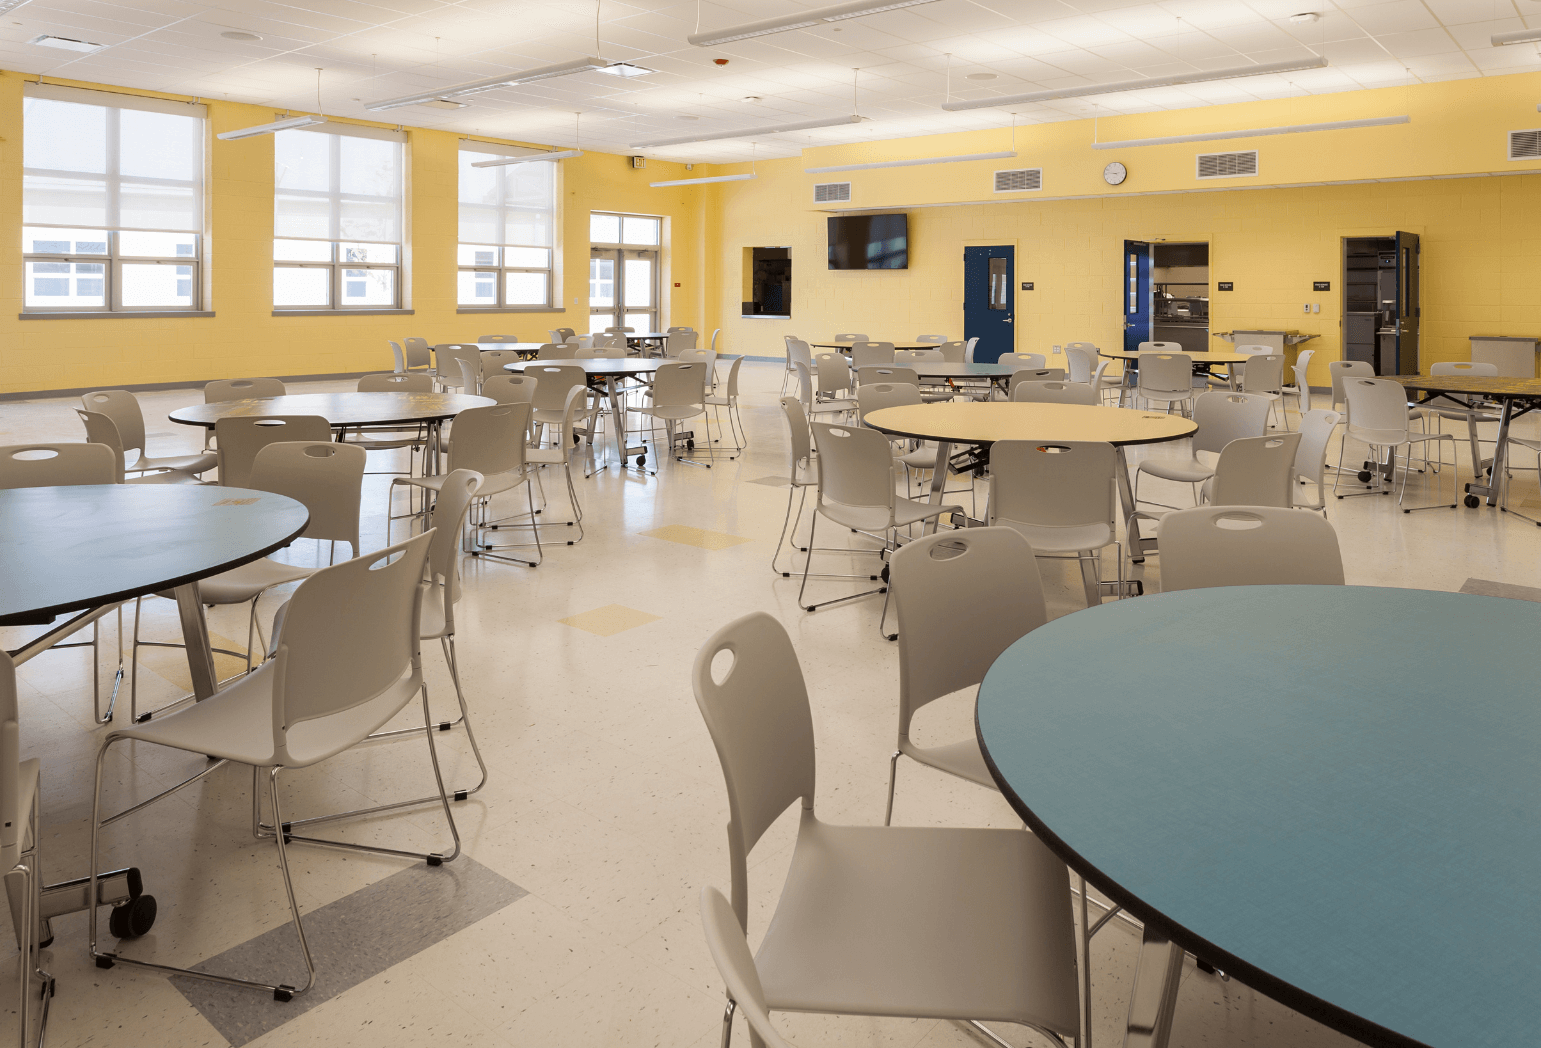 A cafeteria with yellow walls, circular tables, and beige chairs.